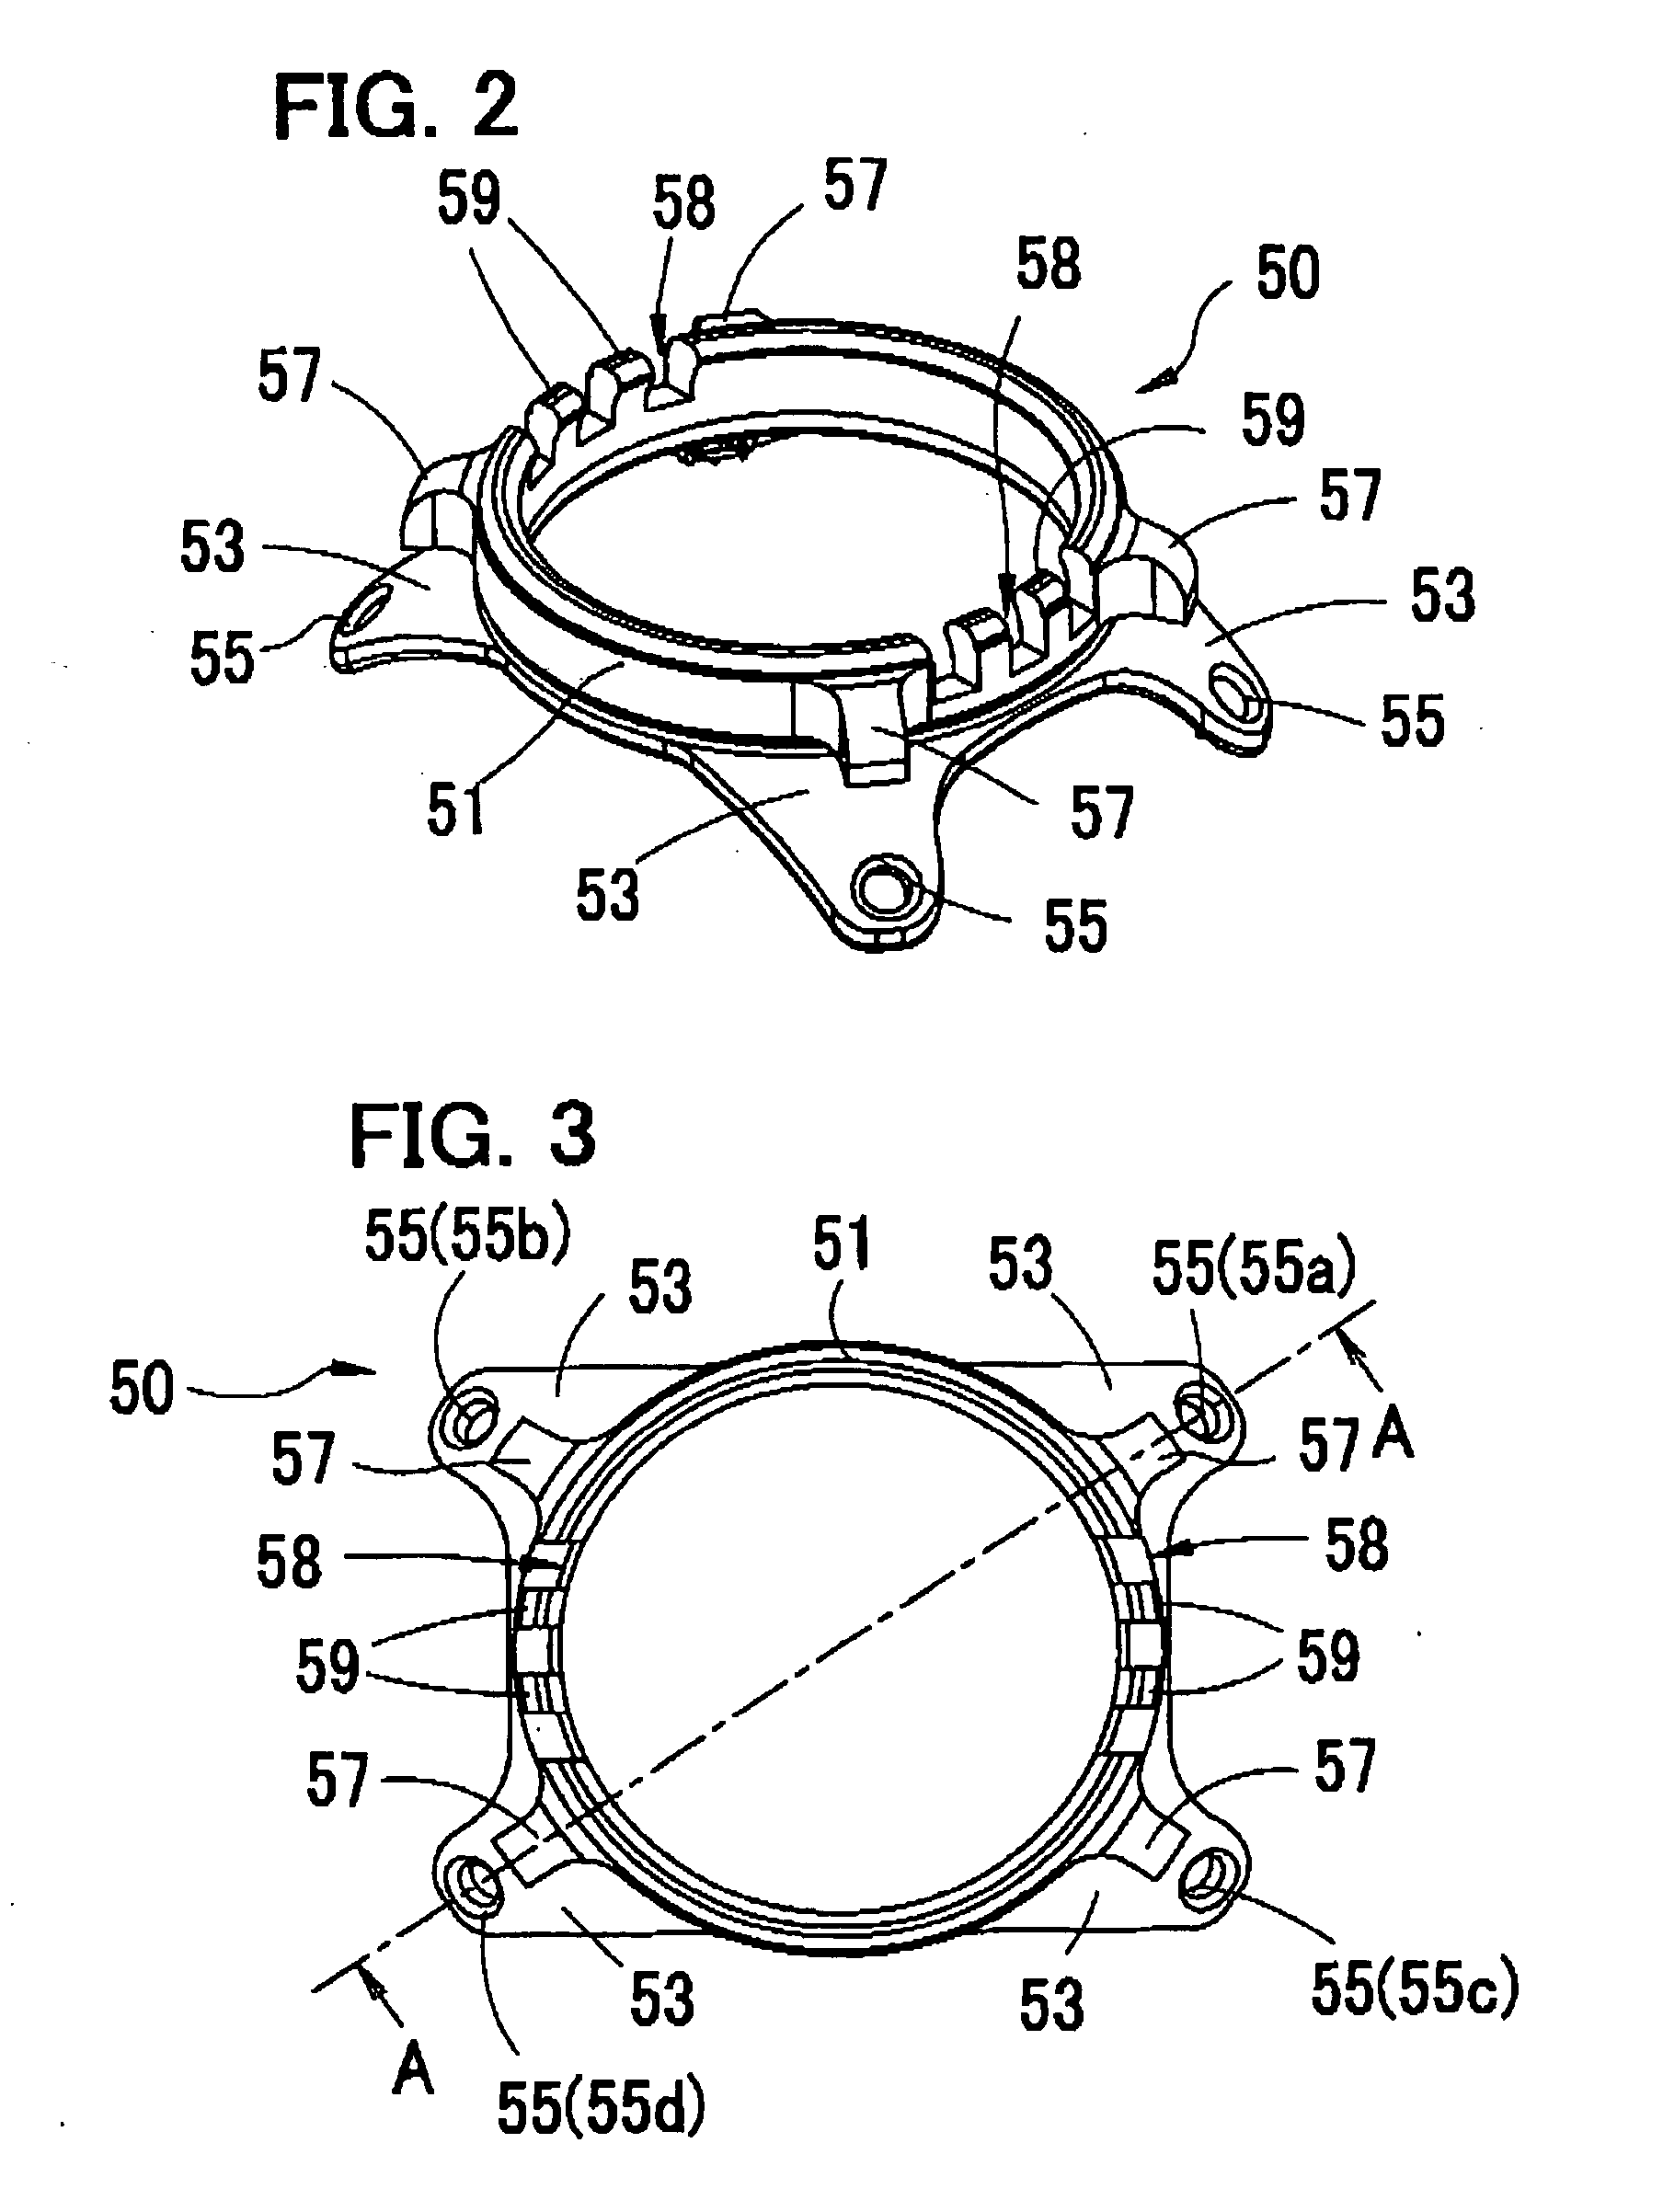 Ring for vitreous surgery for supporting contact lens for the vitreous surgery, cannula used in combination with the ring, and plug used in combination with the ring